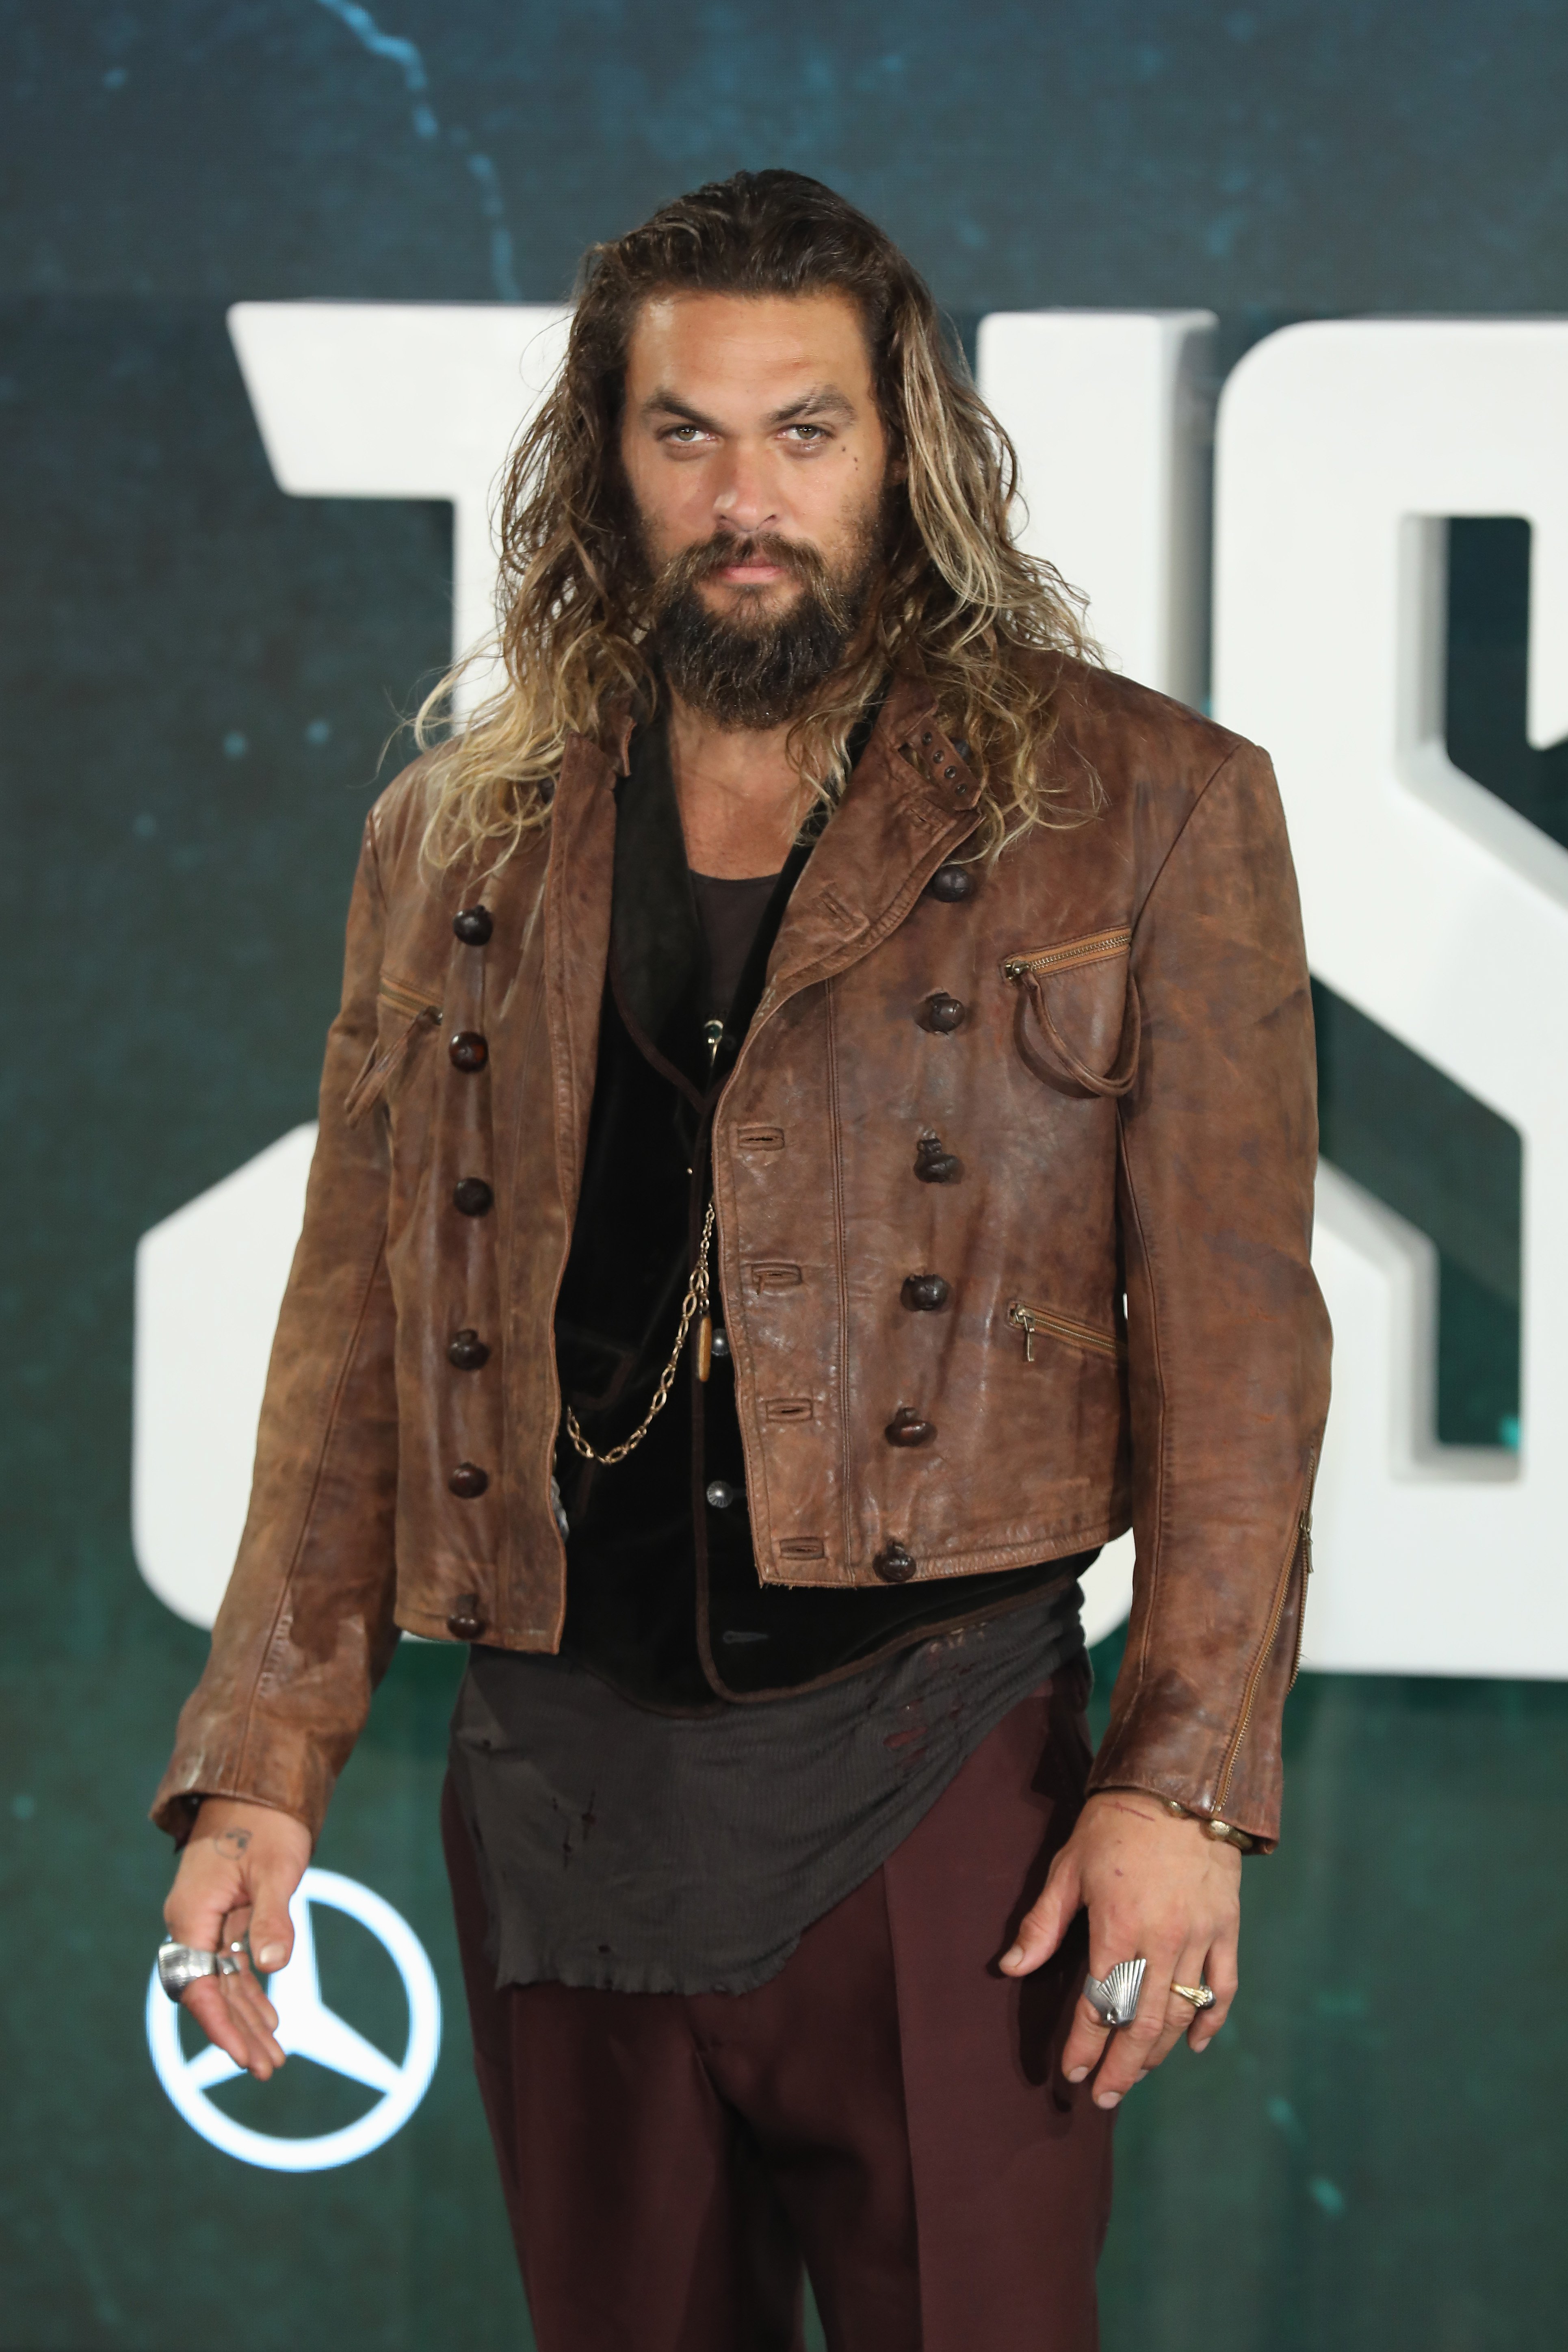 Jason Momoa attends the photocall for "Justice League" in London, England on November 4, 2017 | Photo: Getty Images